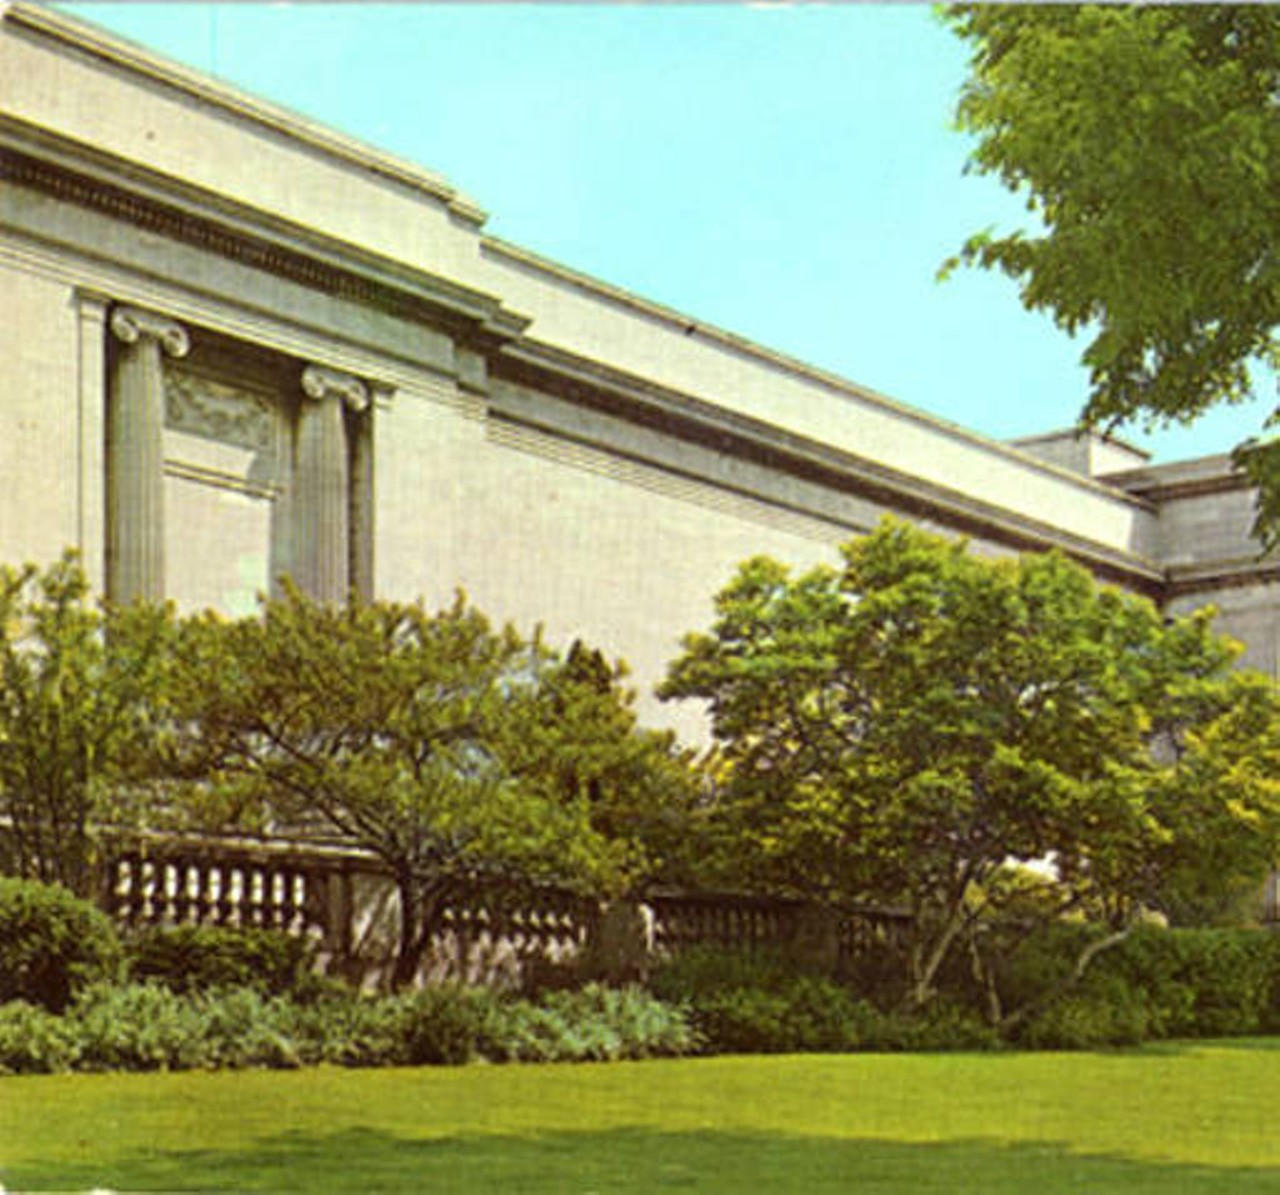 Cleveland Museum of Art, Cleveland, Ohio is a classic structure of marble and has been enhanced with a new contemporary wing. c. 1960